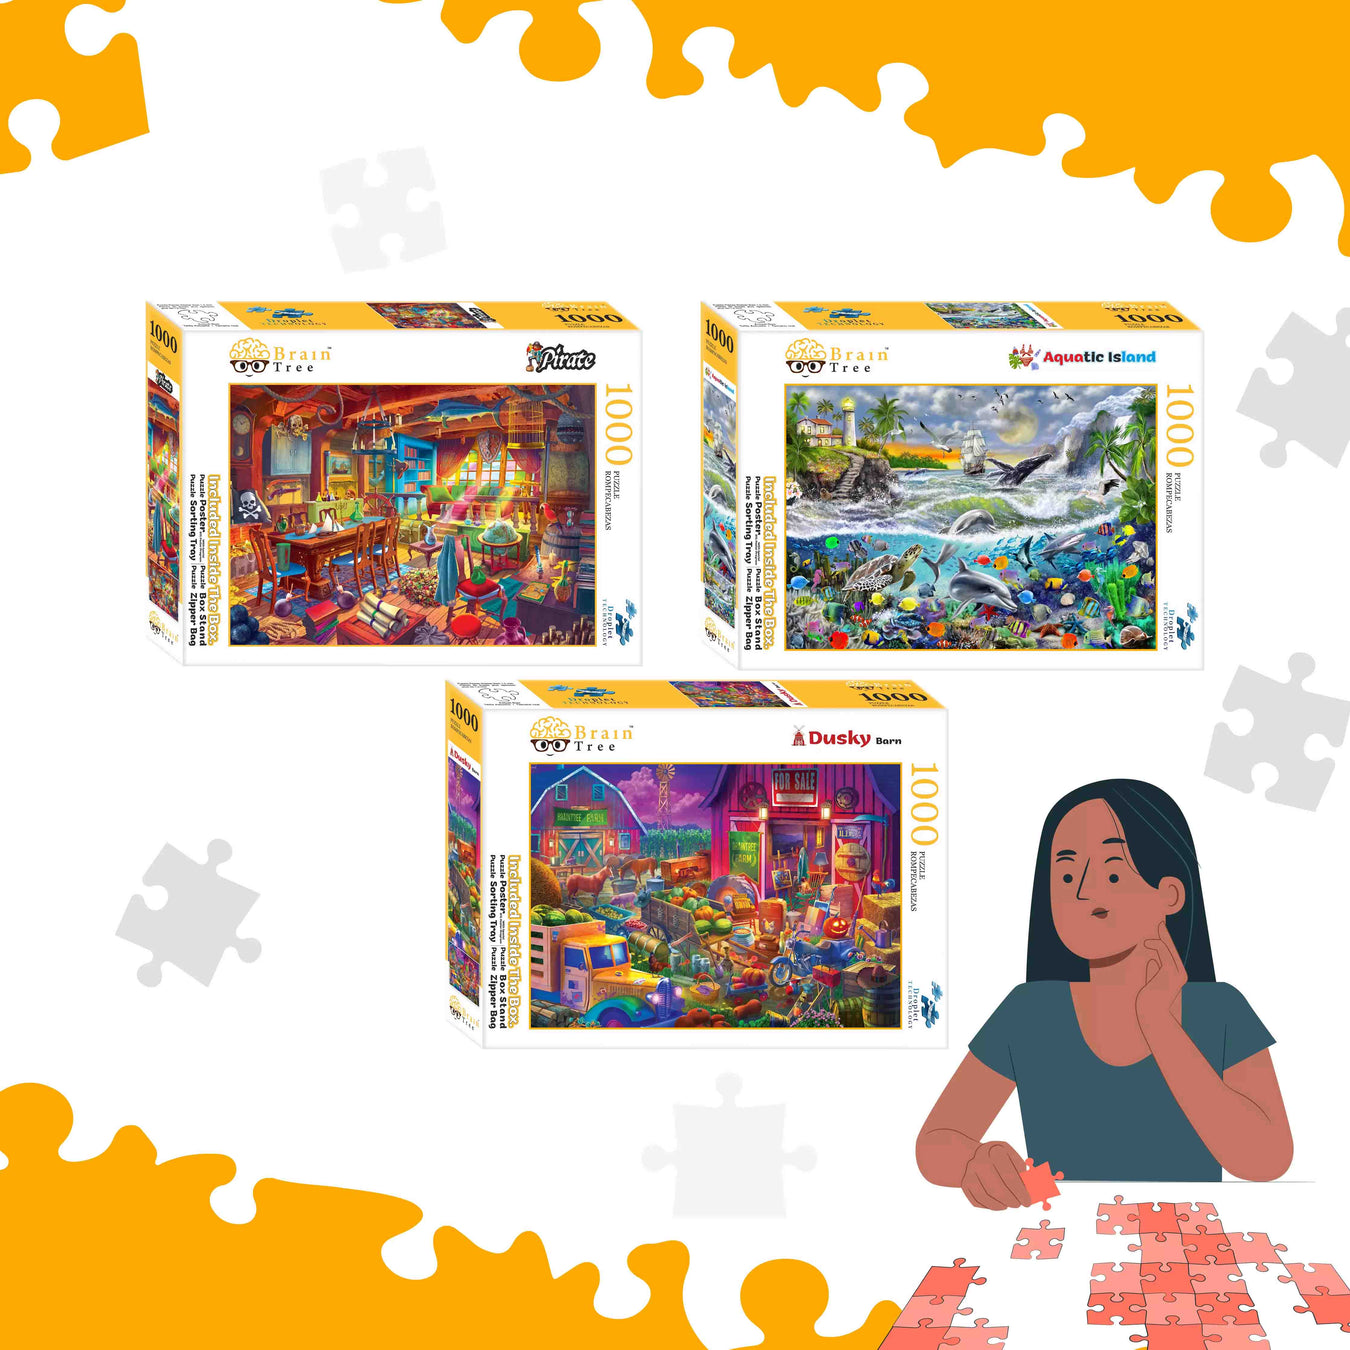  free online jigsaw puzzles 1000 pieces